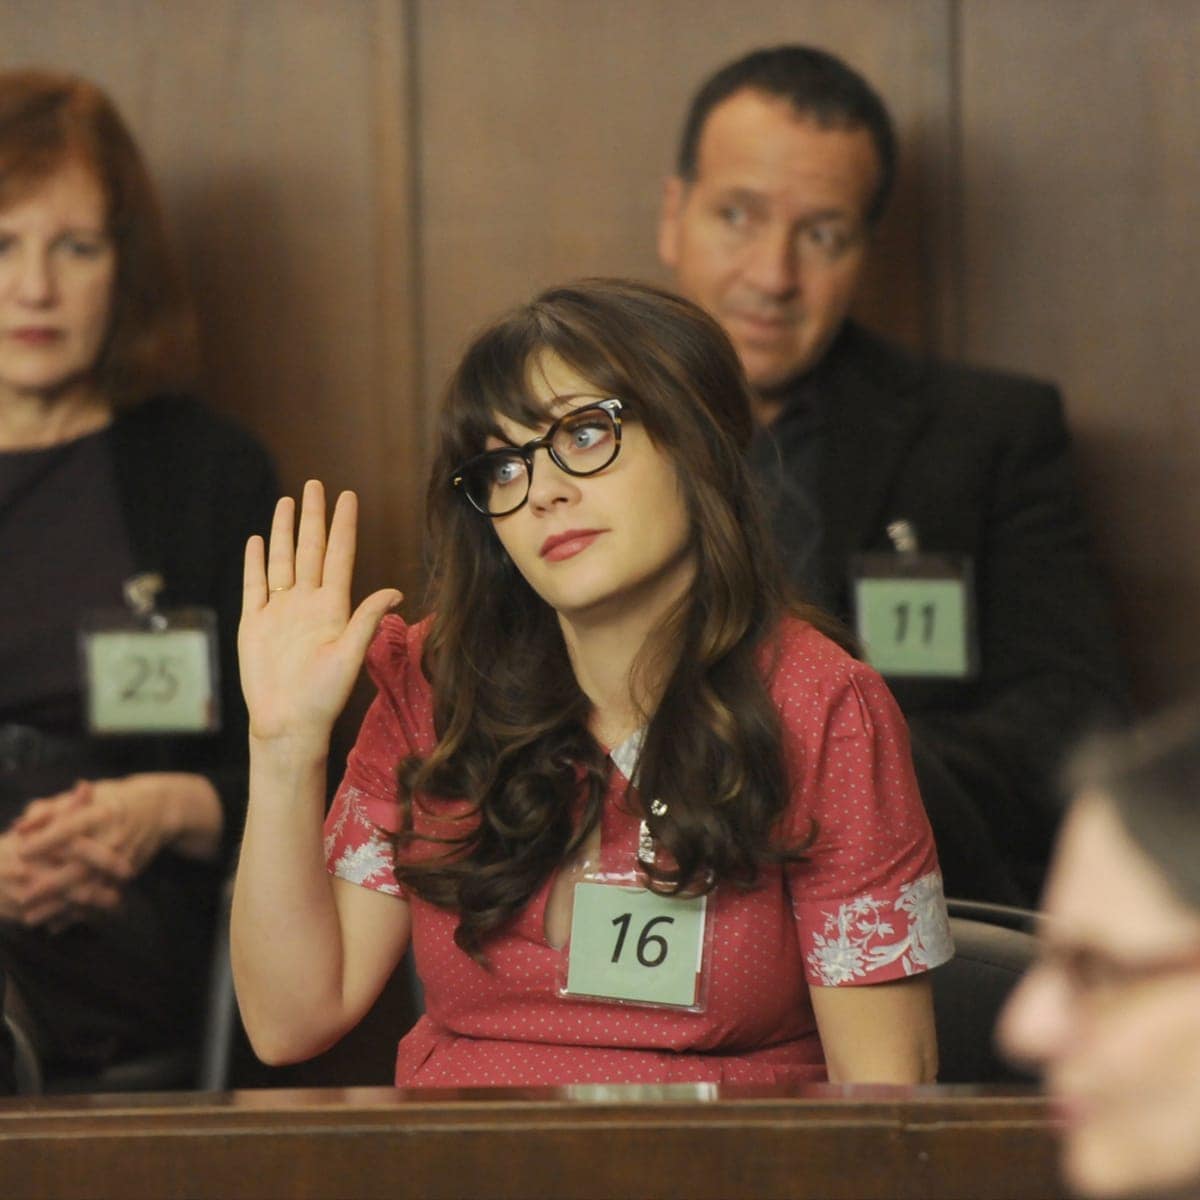 Zooey Deschanel took a break from filming New Girl season 5 because she was pregnant